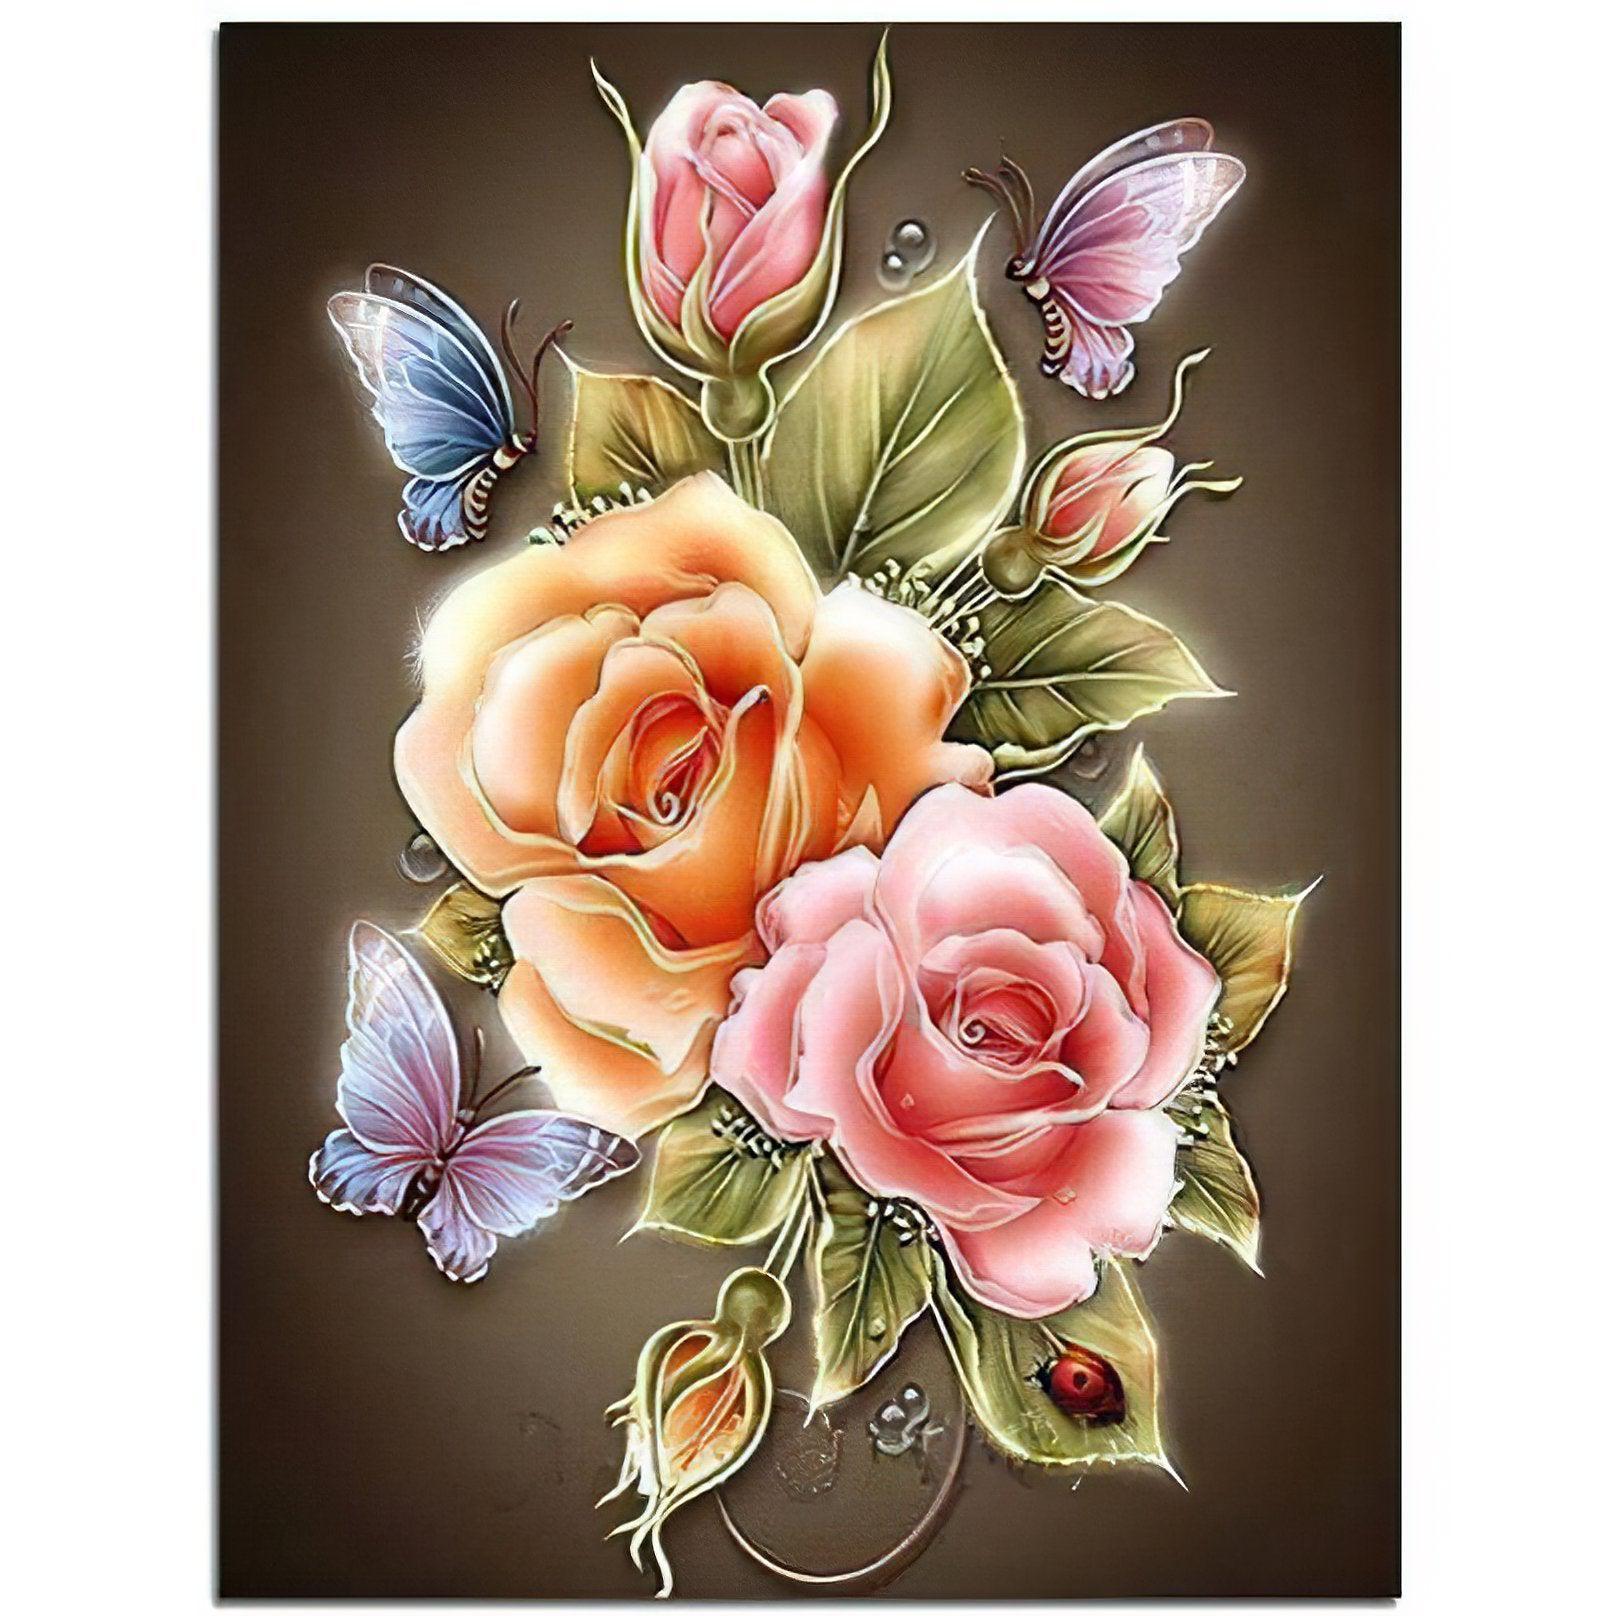 Celebrate nature's harmony with flowers and a butterfly.Flowers And Butterfly - Diamondartlove